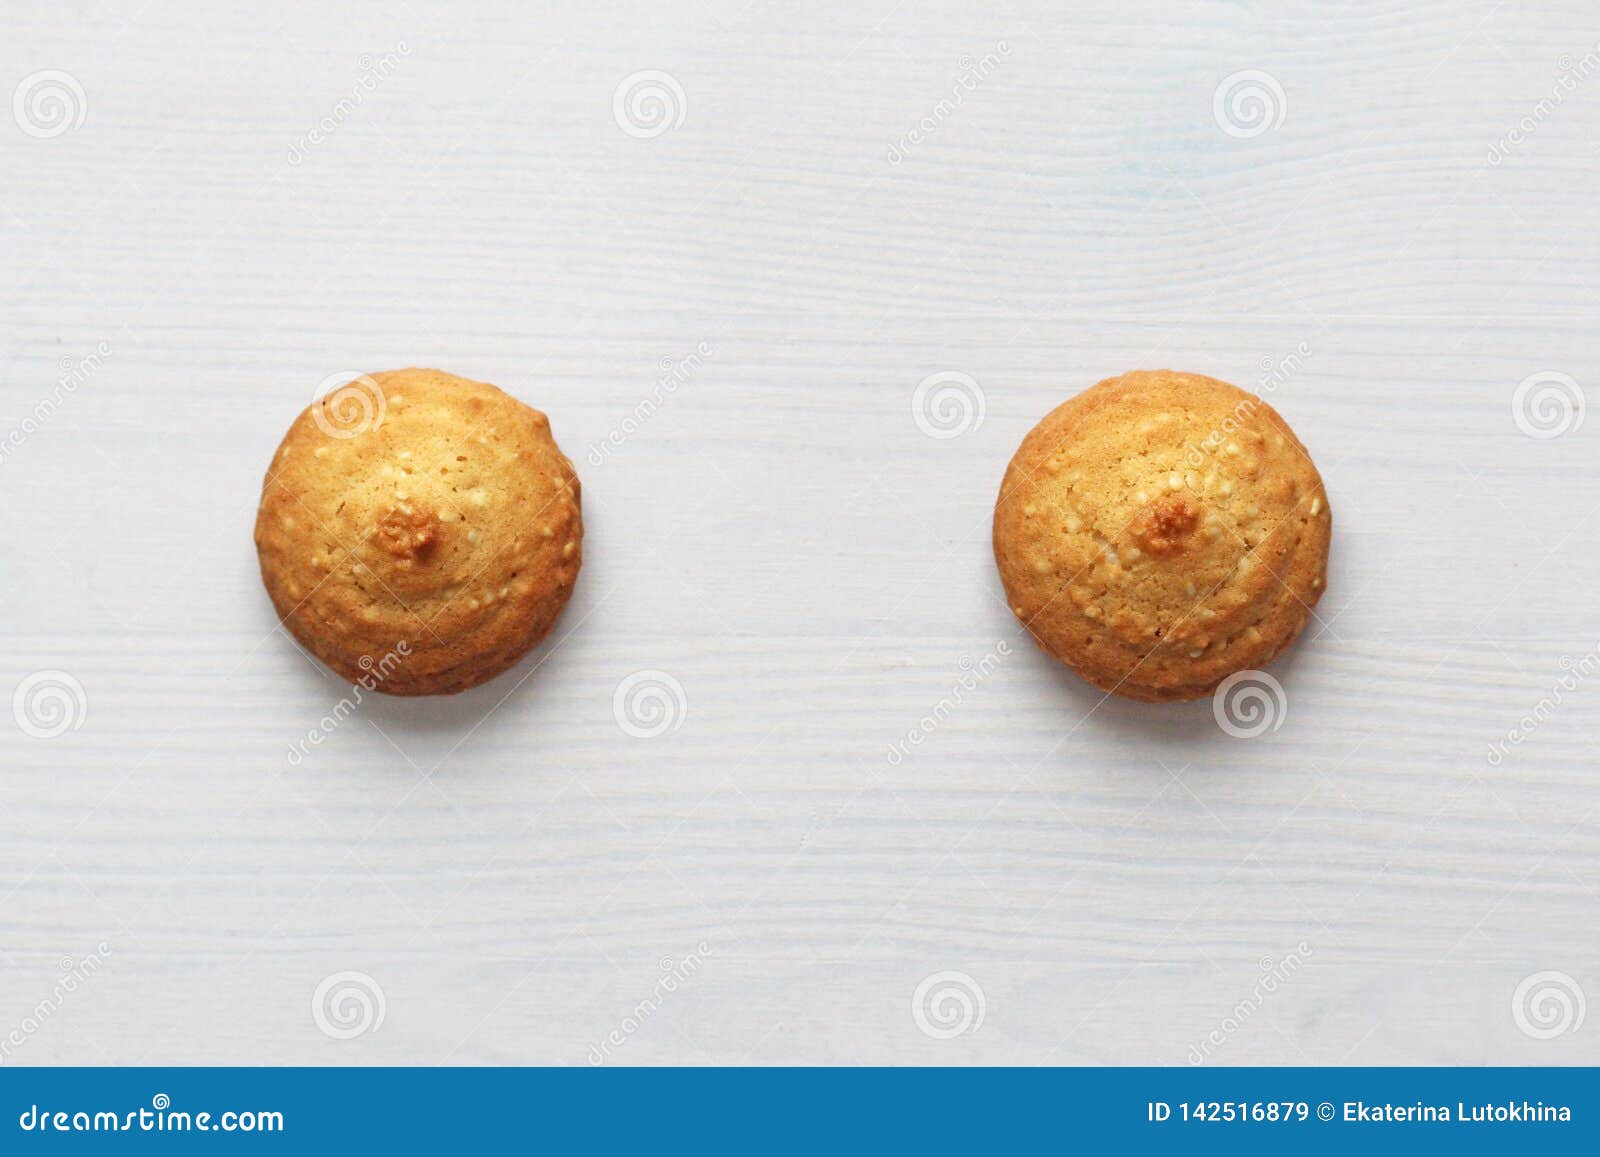 Cookies on a White Background, Similar To Female Nipples. Nipples ...